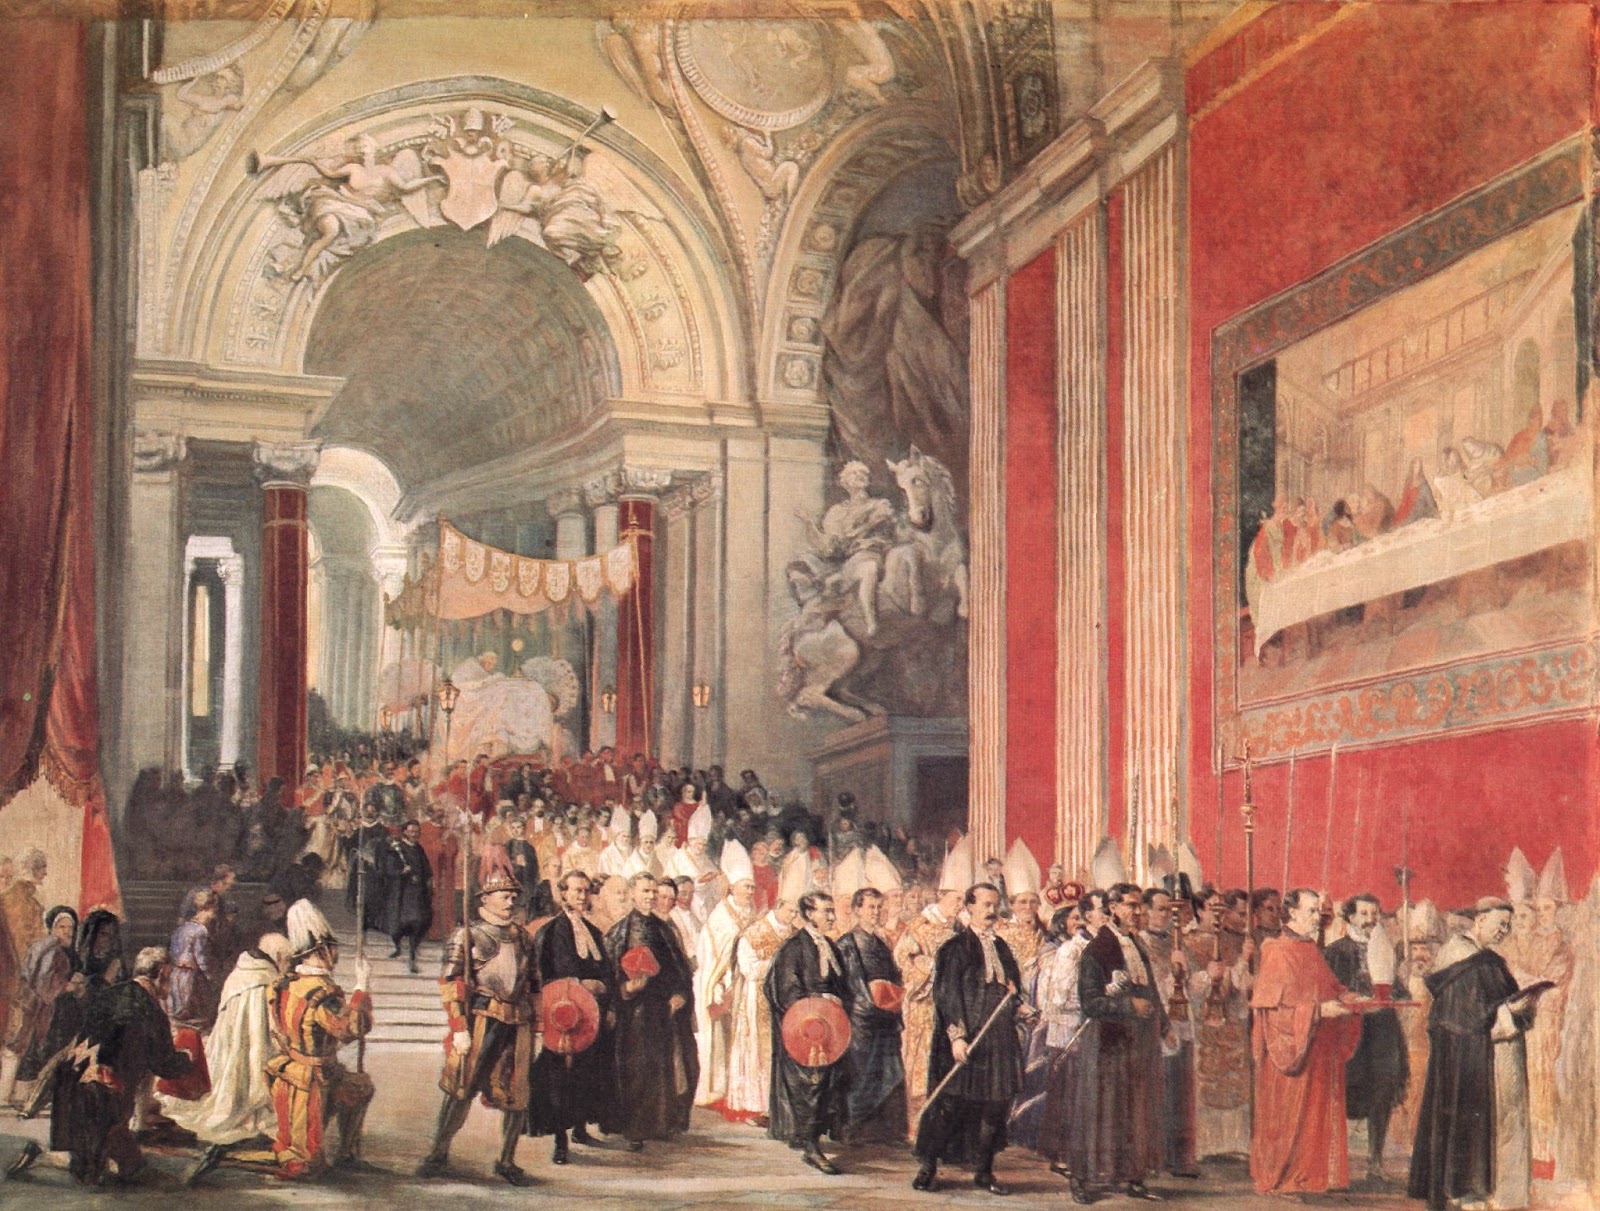 Corpus_Christi_Procession_with_Pope_Gregory_XVI_in_the_Vatican